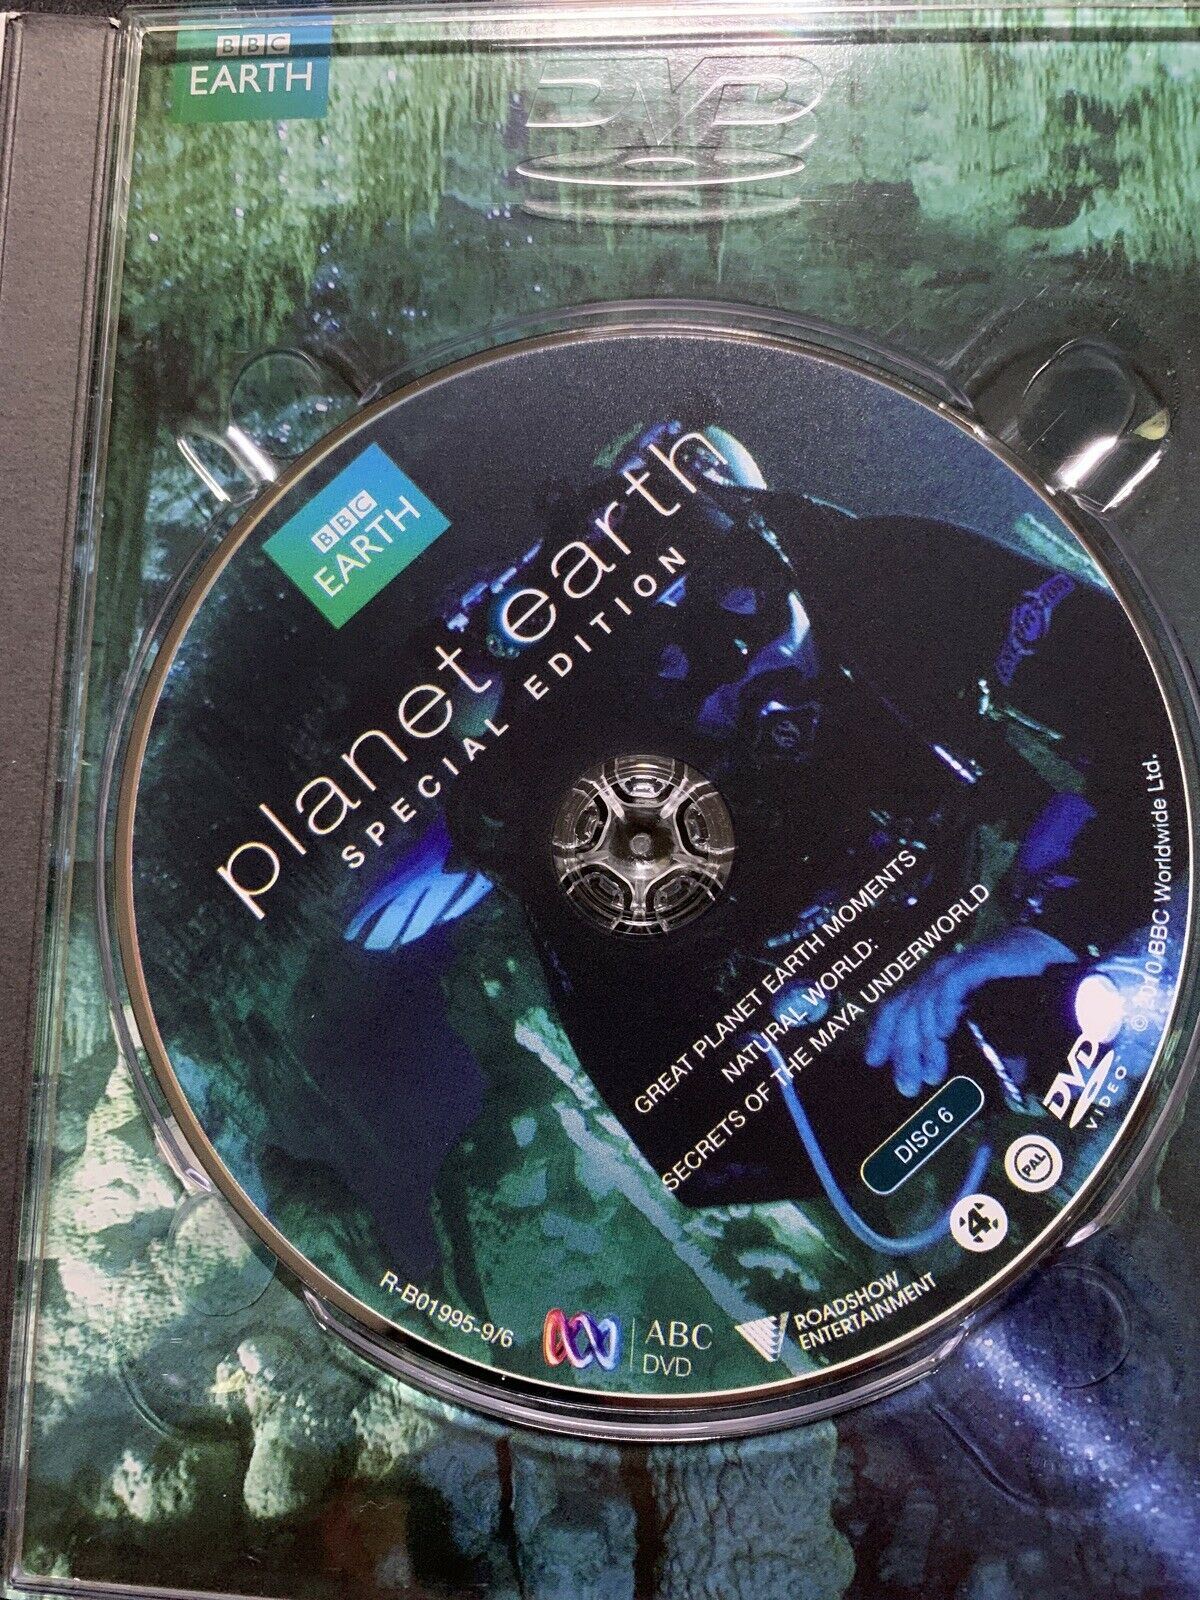 Planet Earth - The Complete Series - Special Edition (DVD, 2010, 6-Disc Set)